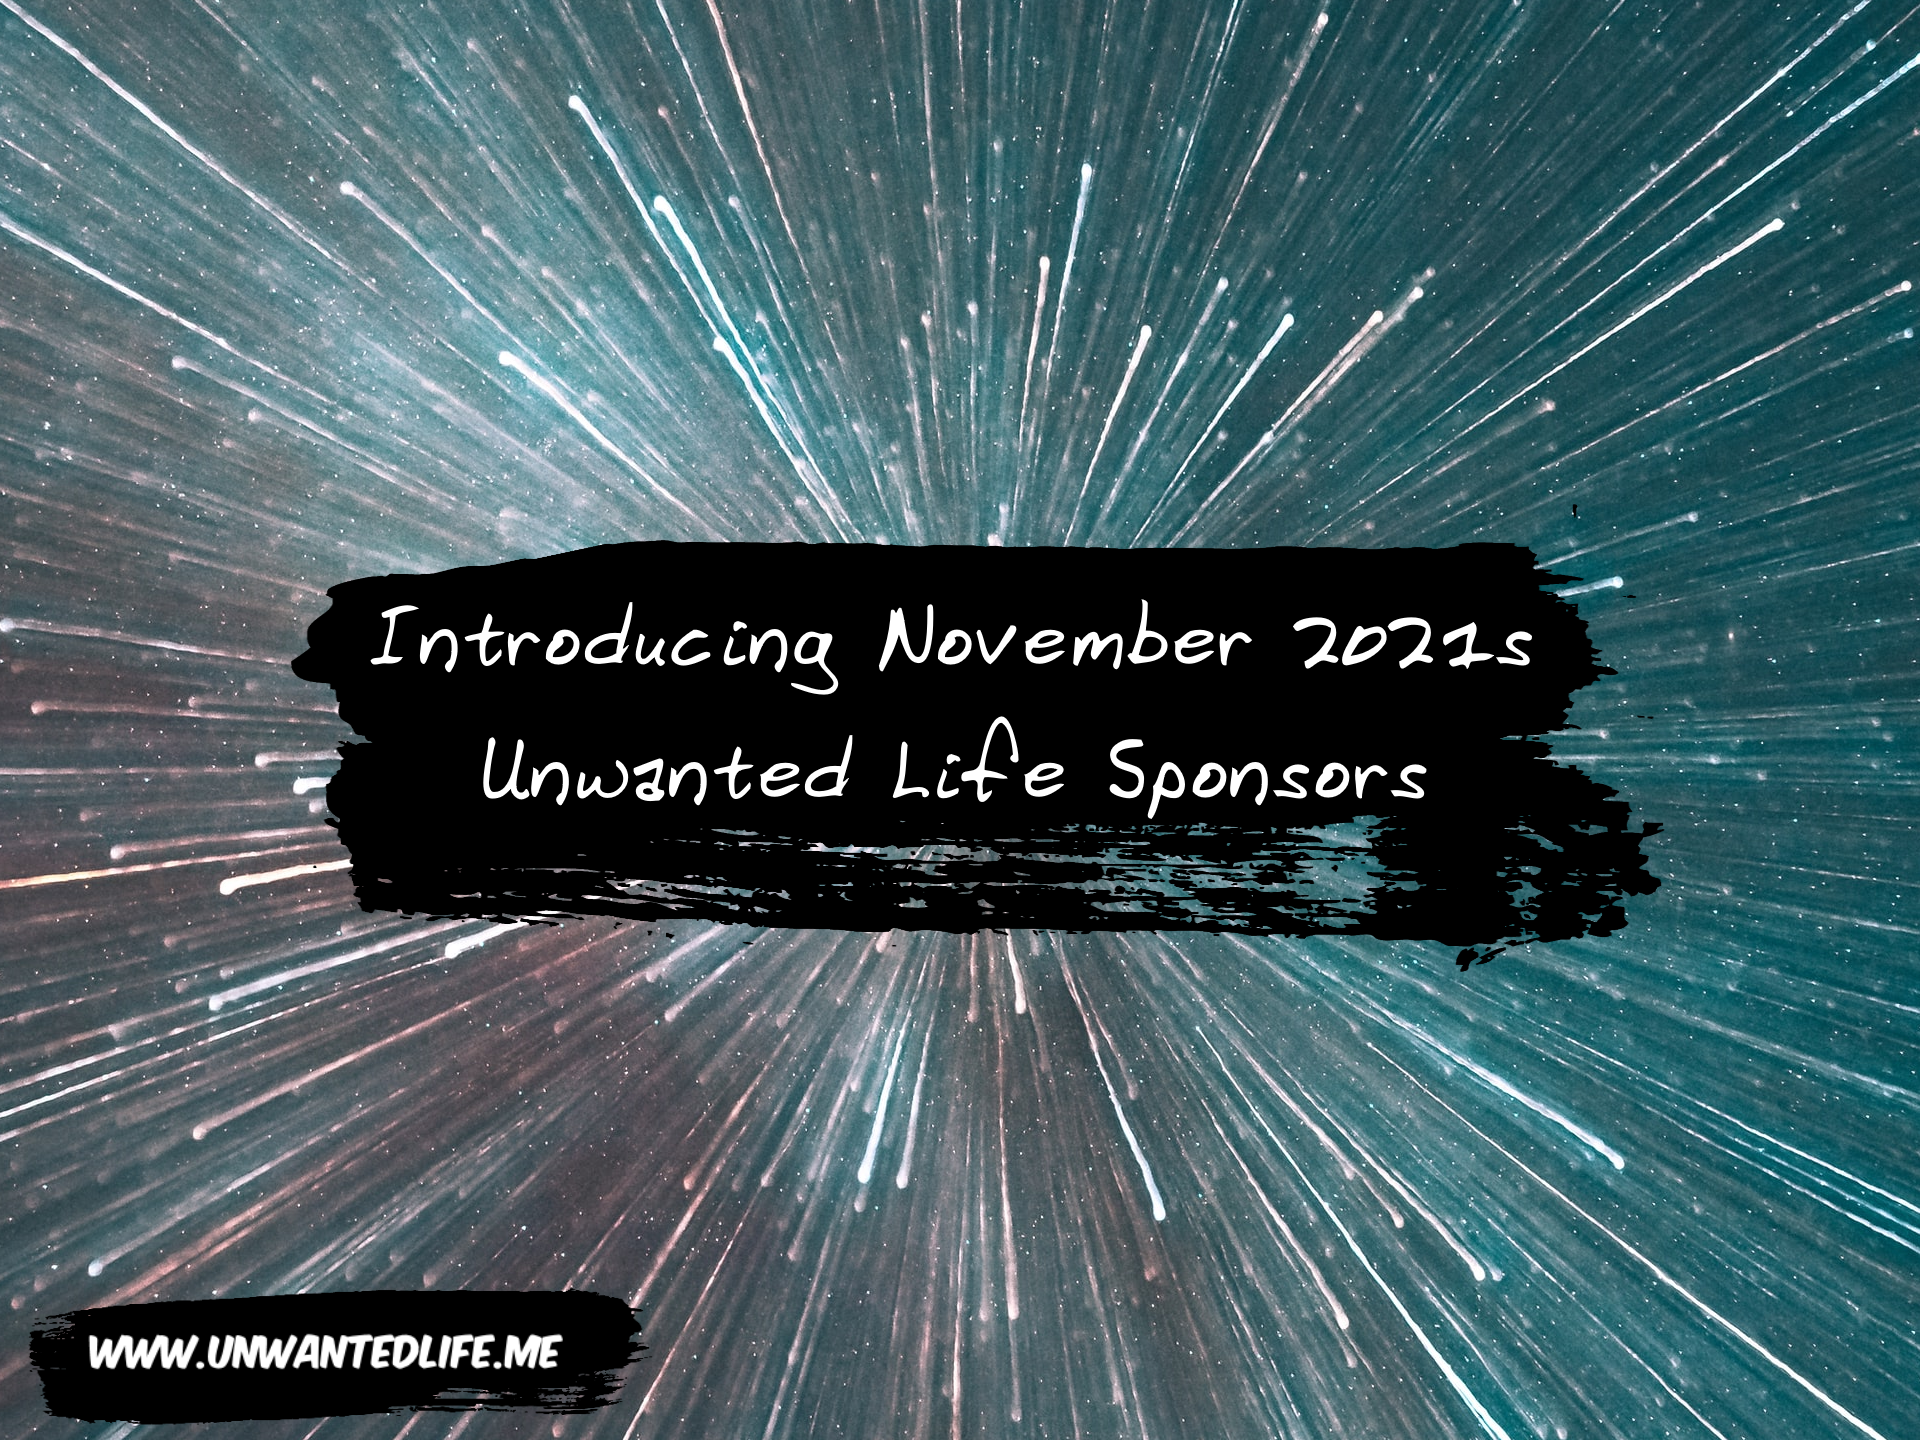 A simple moving through space at high speed image with the title of the article over the top: Introducing December 2021s Unwanted Life Sponsors